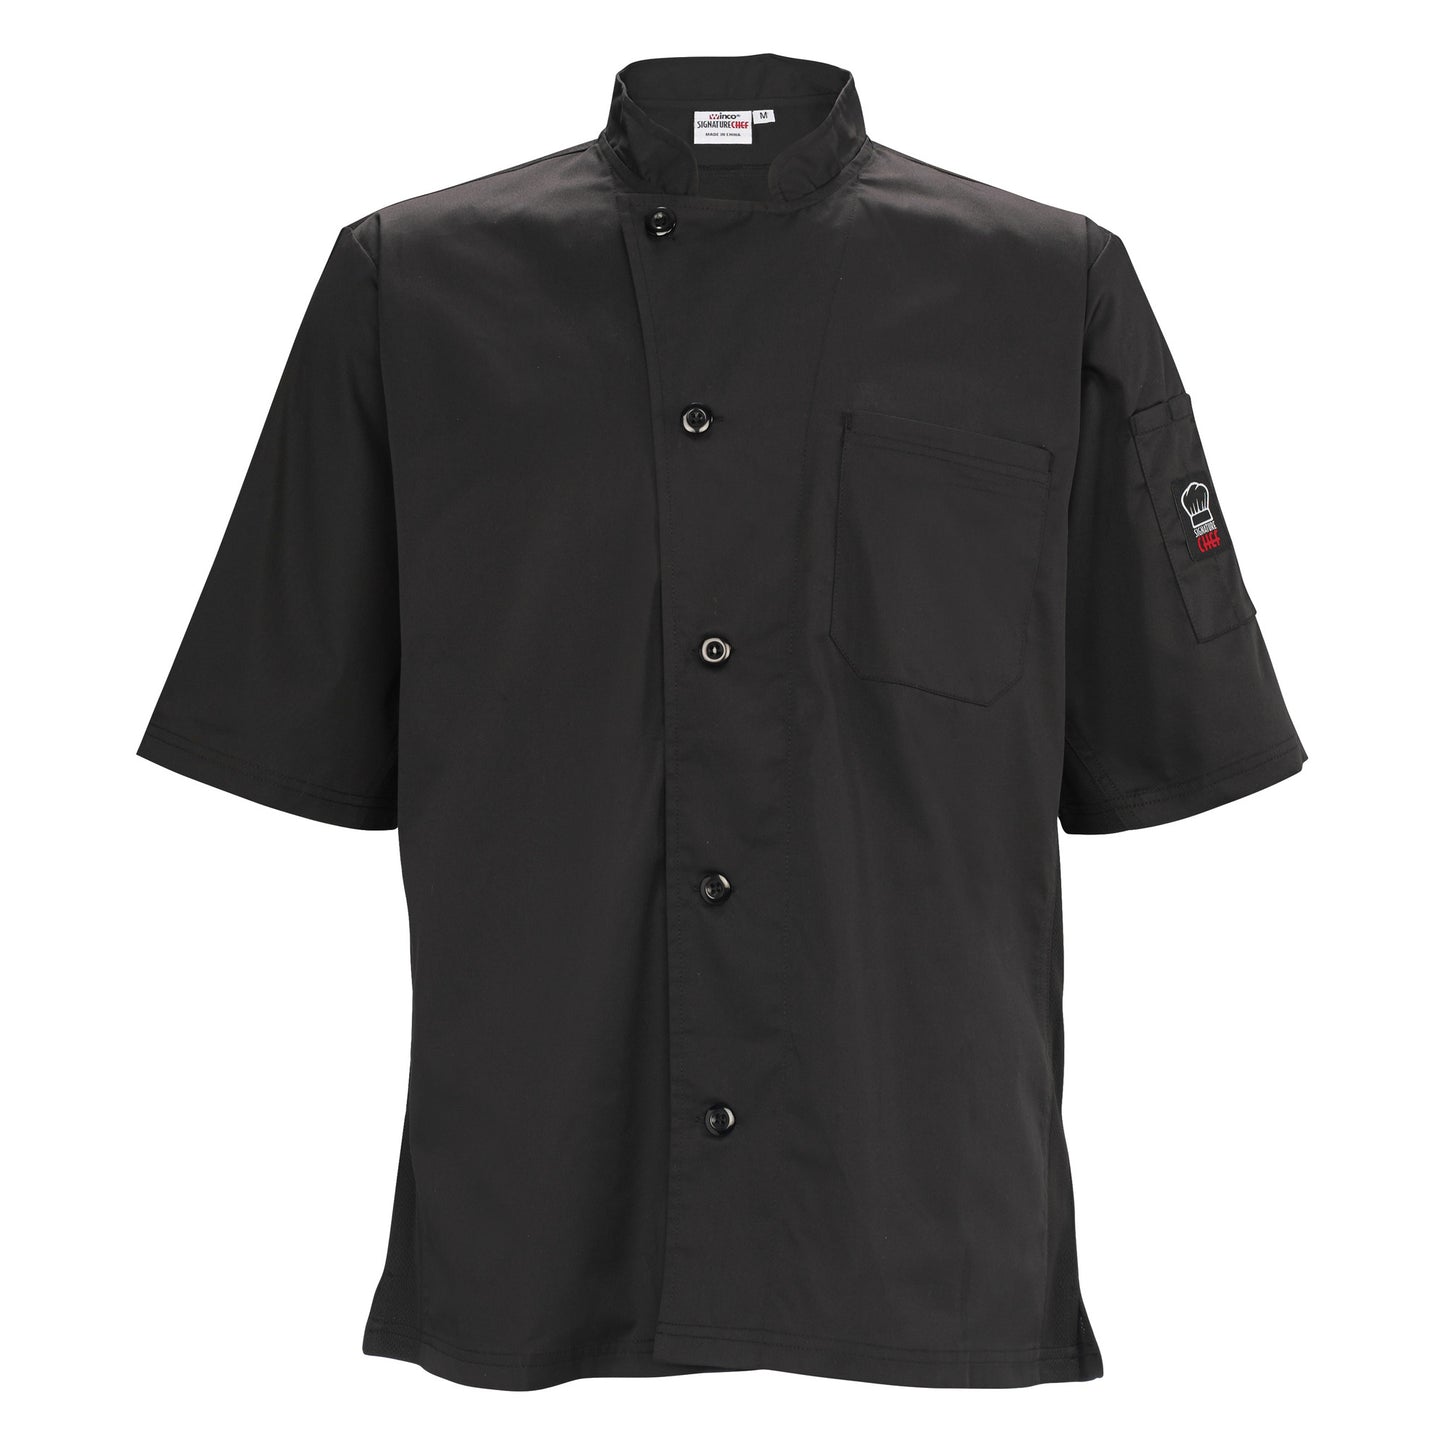 UNF-9KL - Ventilated Chef Shirt, Tapered Fit